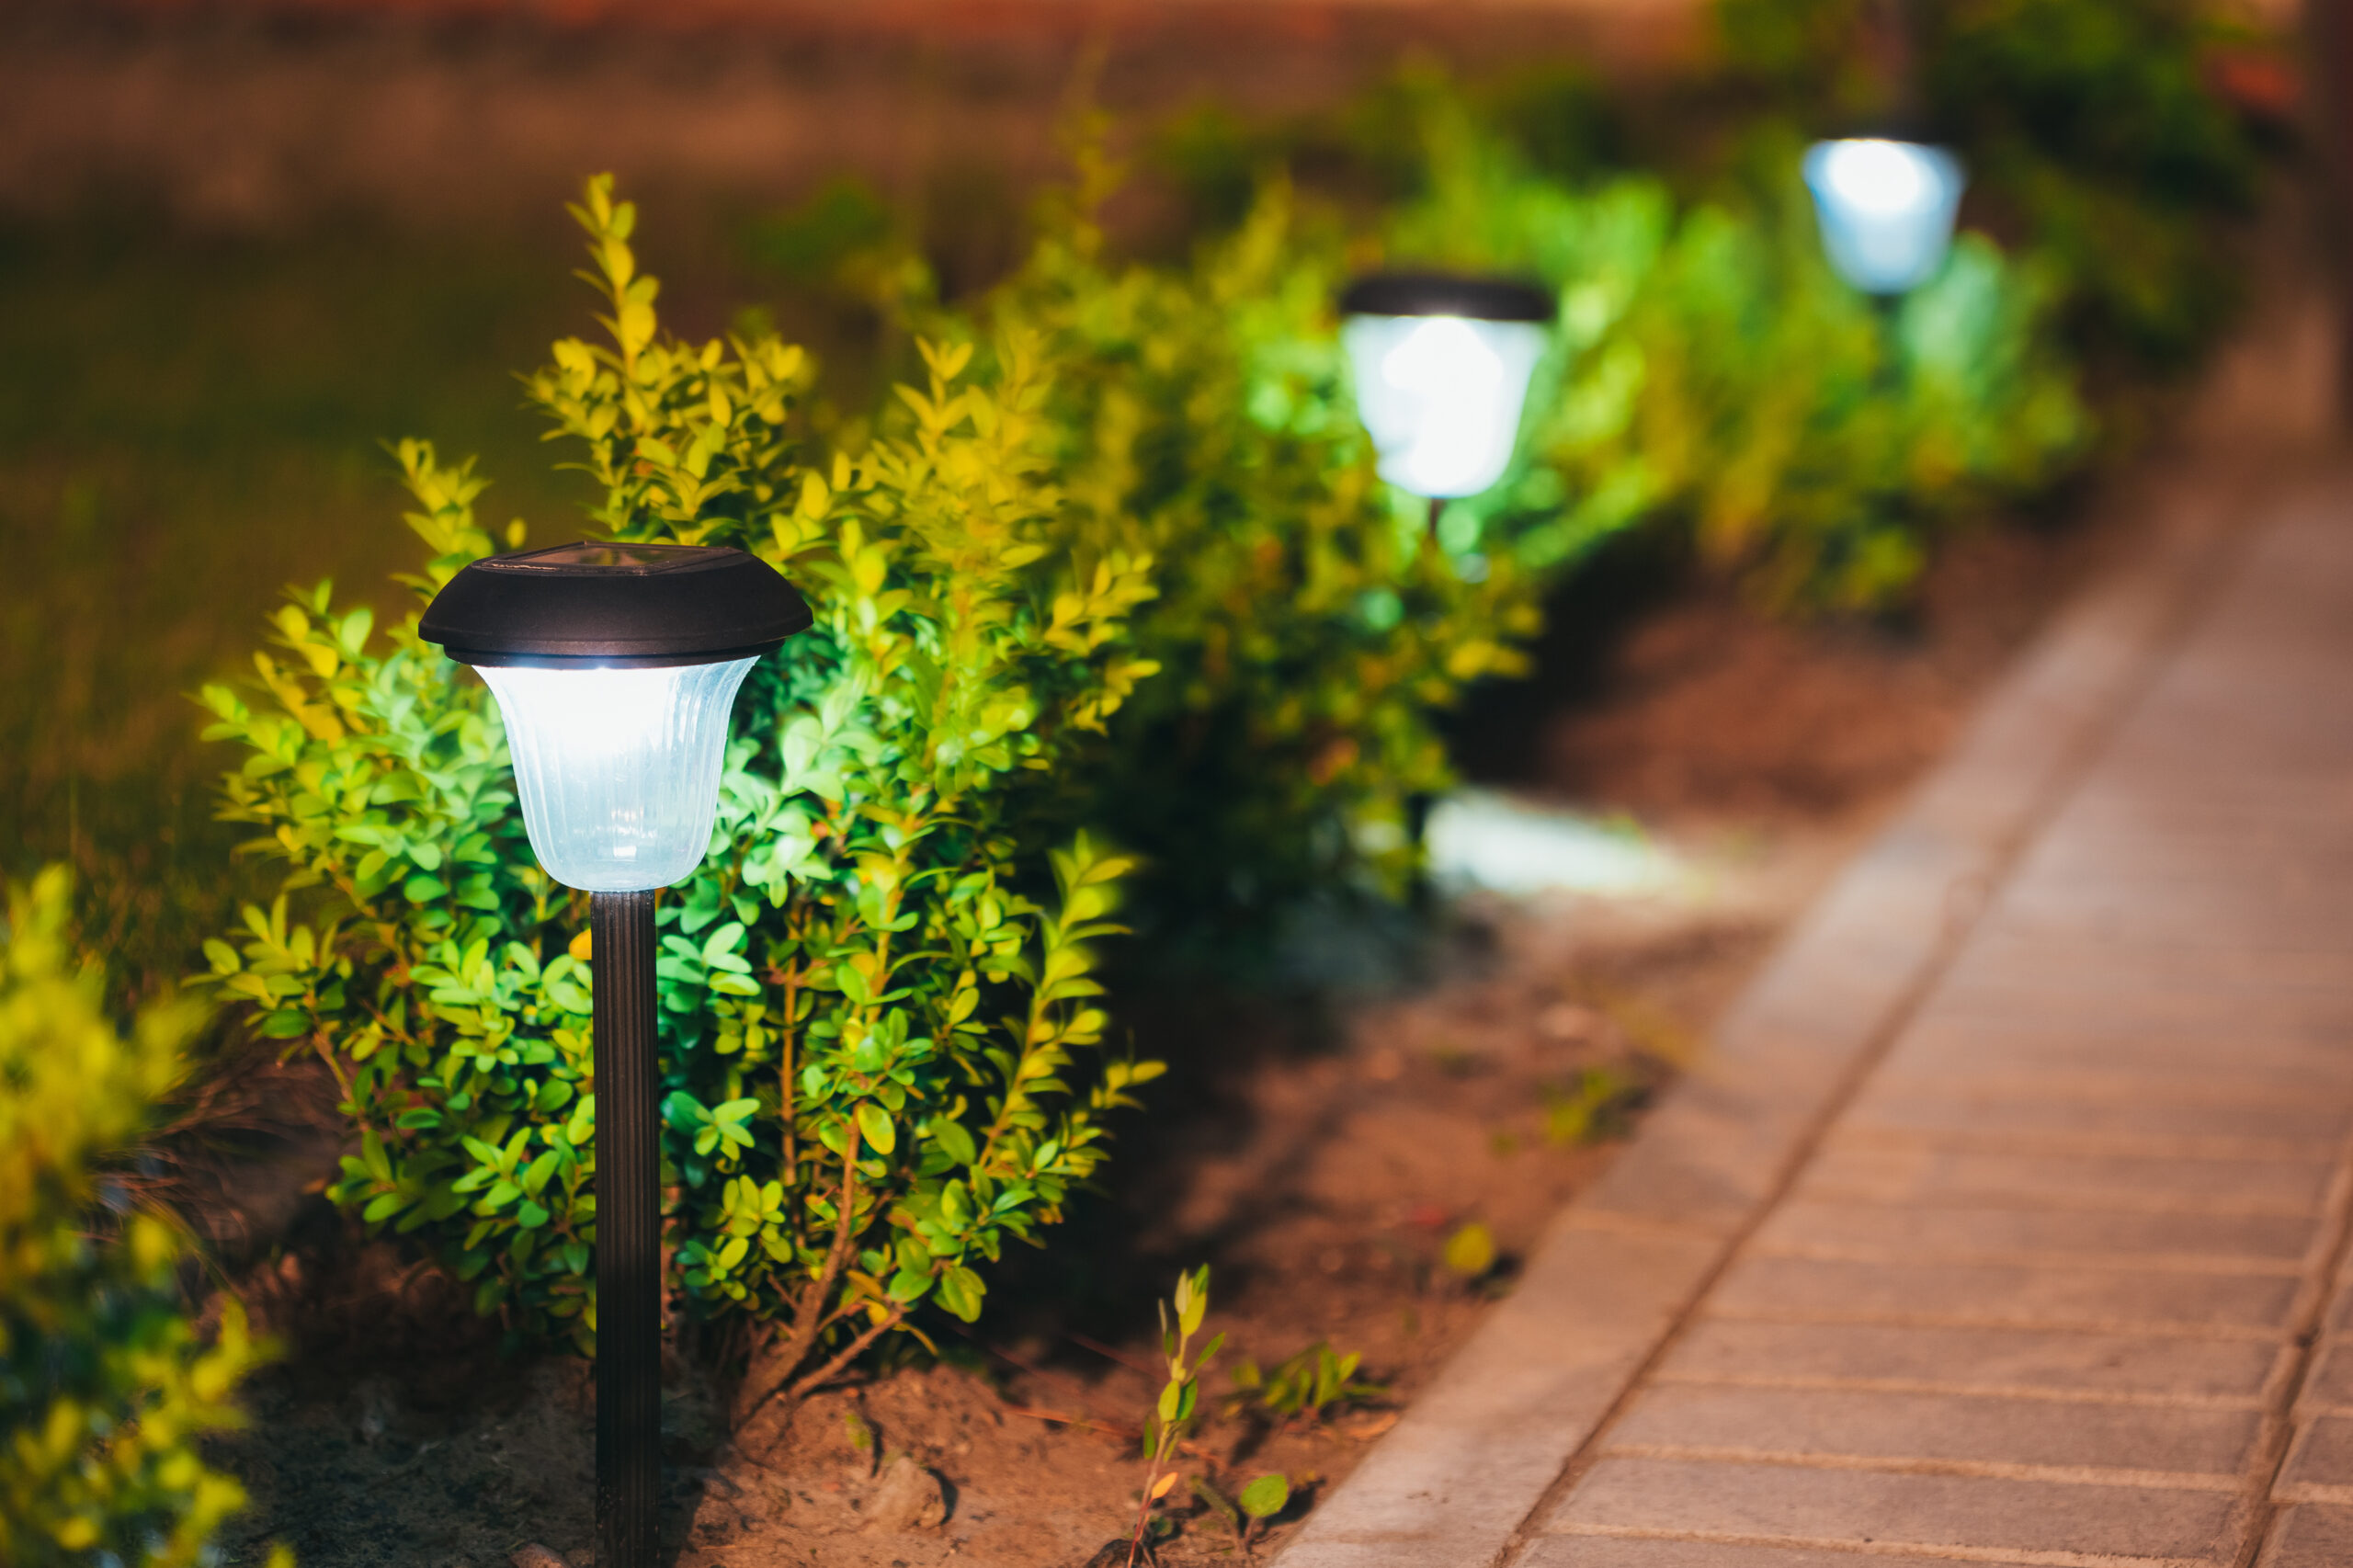 Should you install solar landscape lighting in Ansonia village, OH